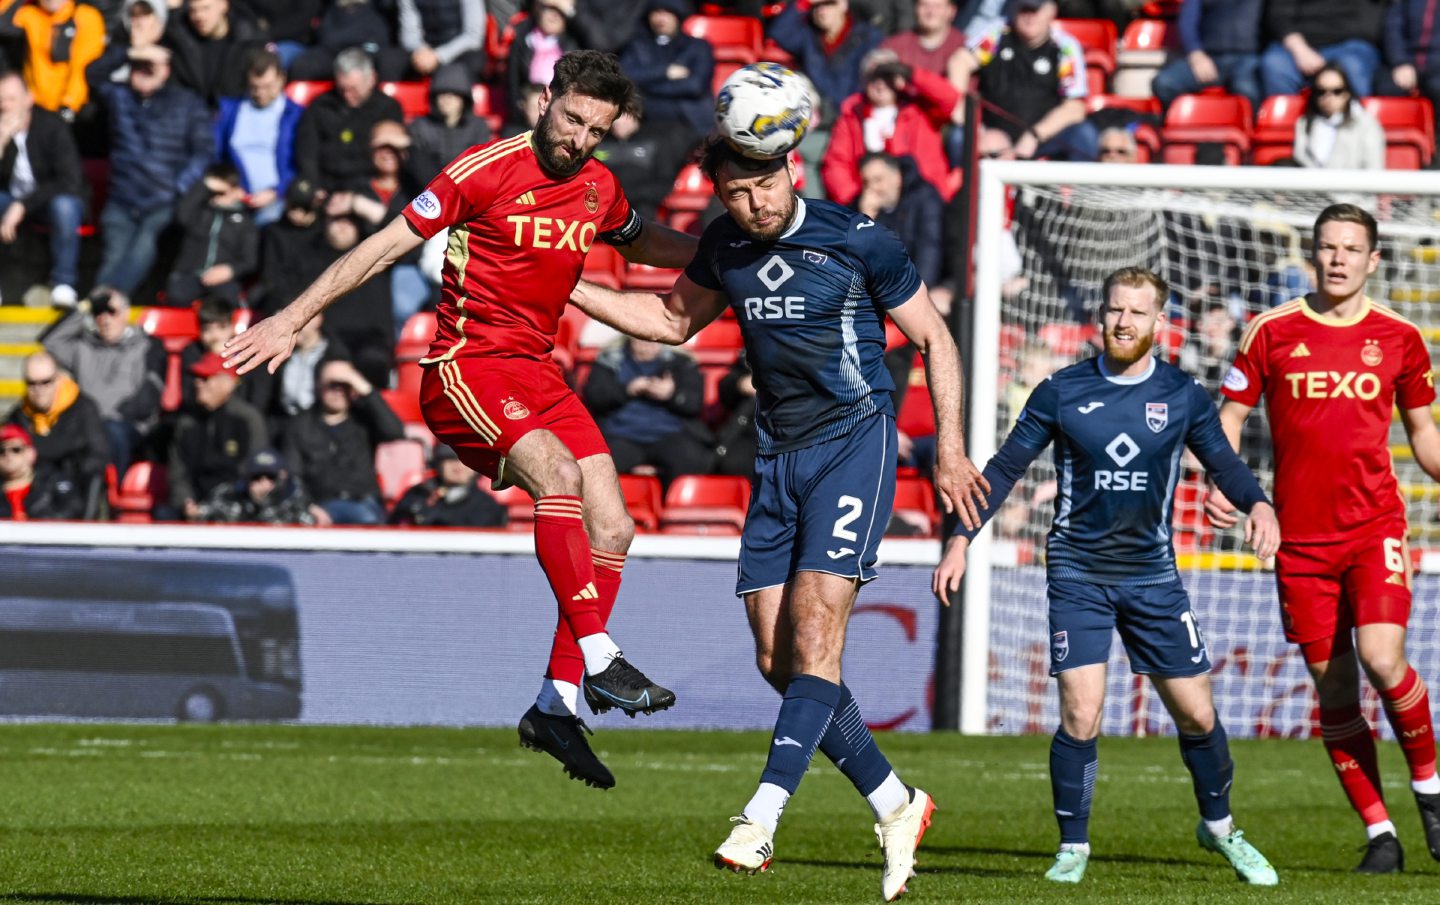 Aberdeen's Graeme Shinnie and Ross County's Connor Randall in action at Pittodrie. Image: SNS